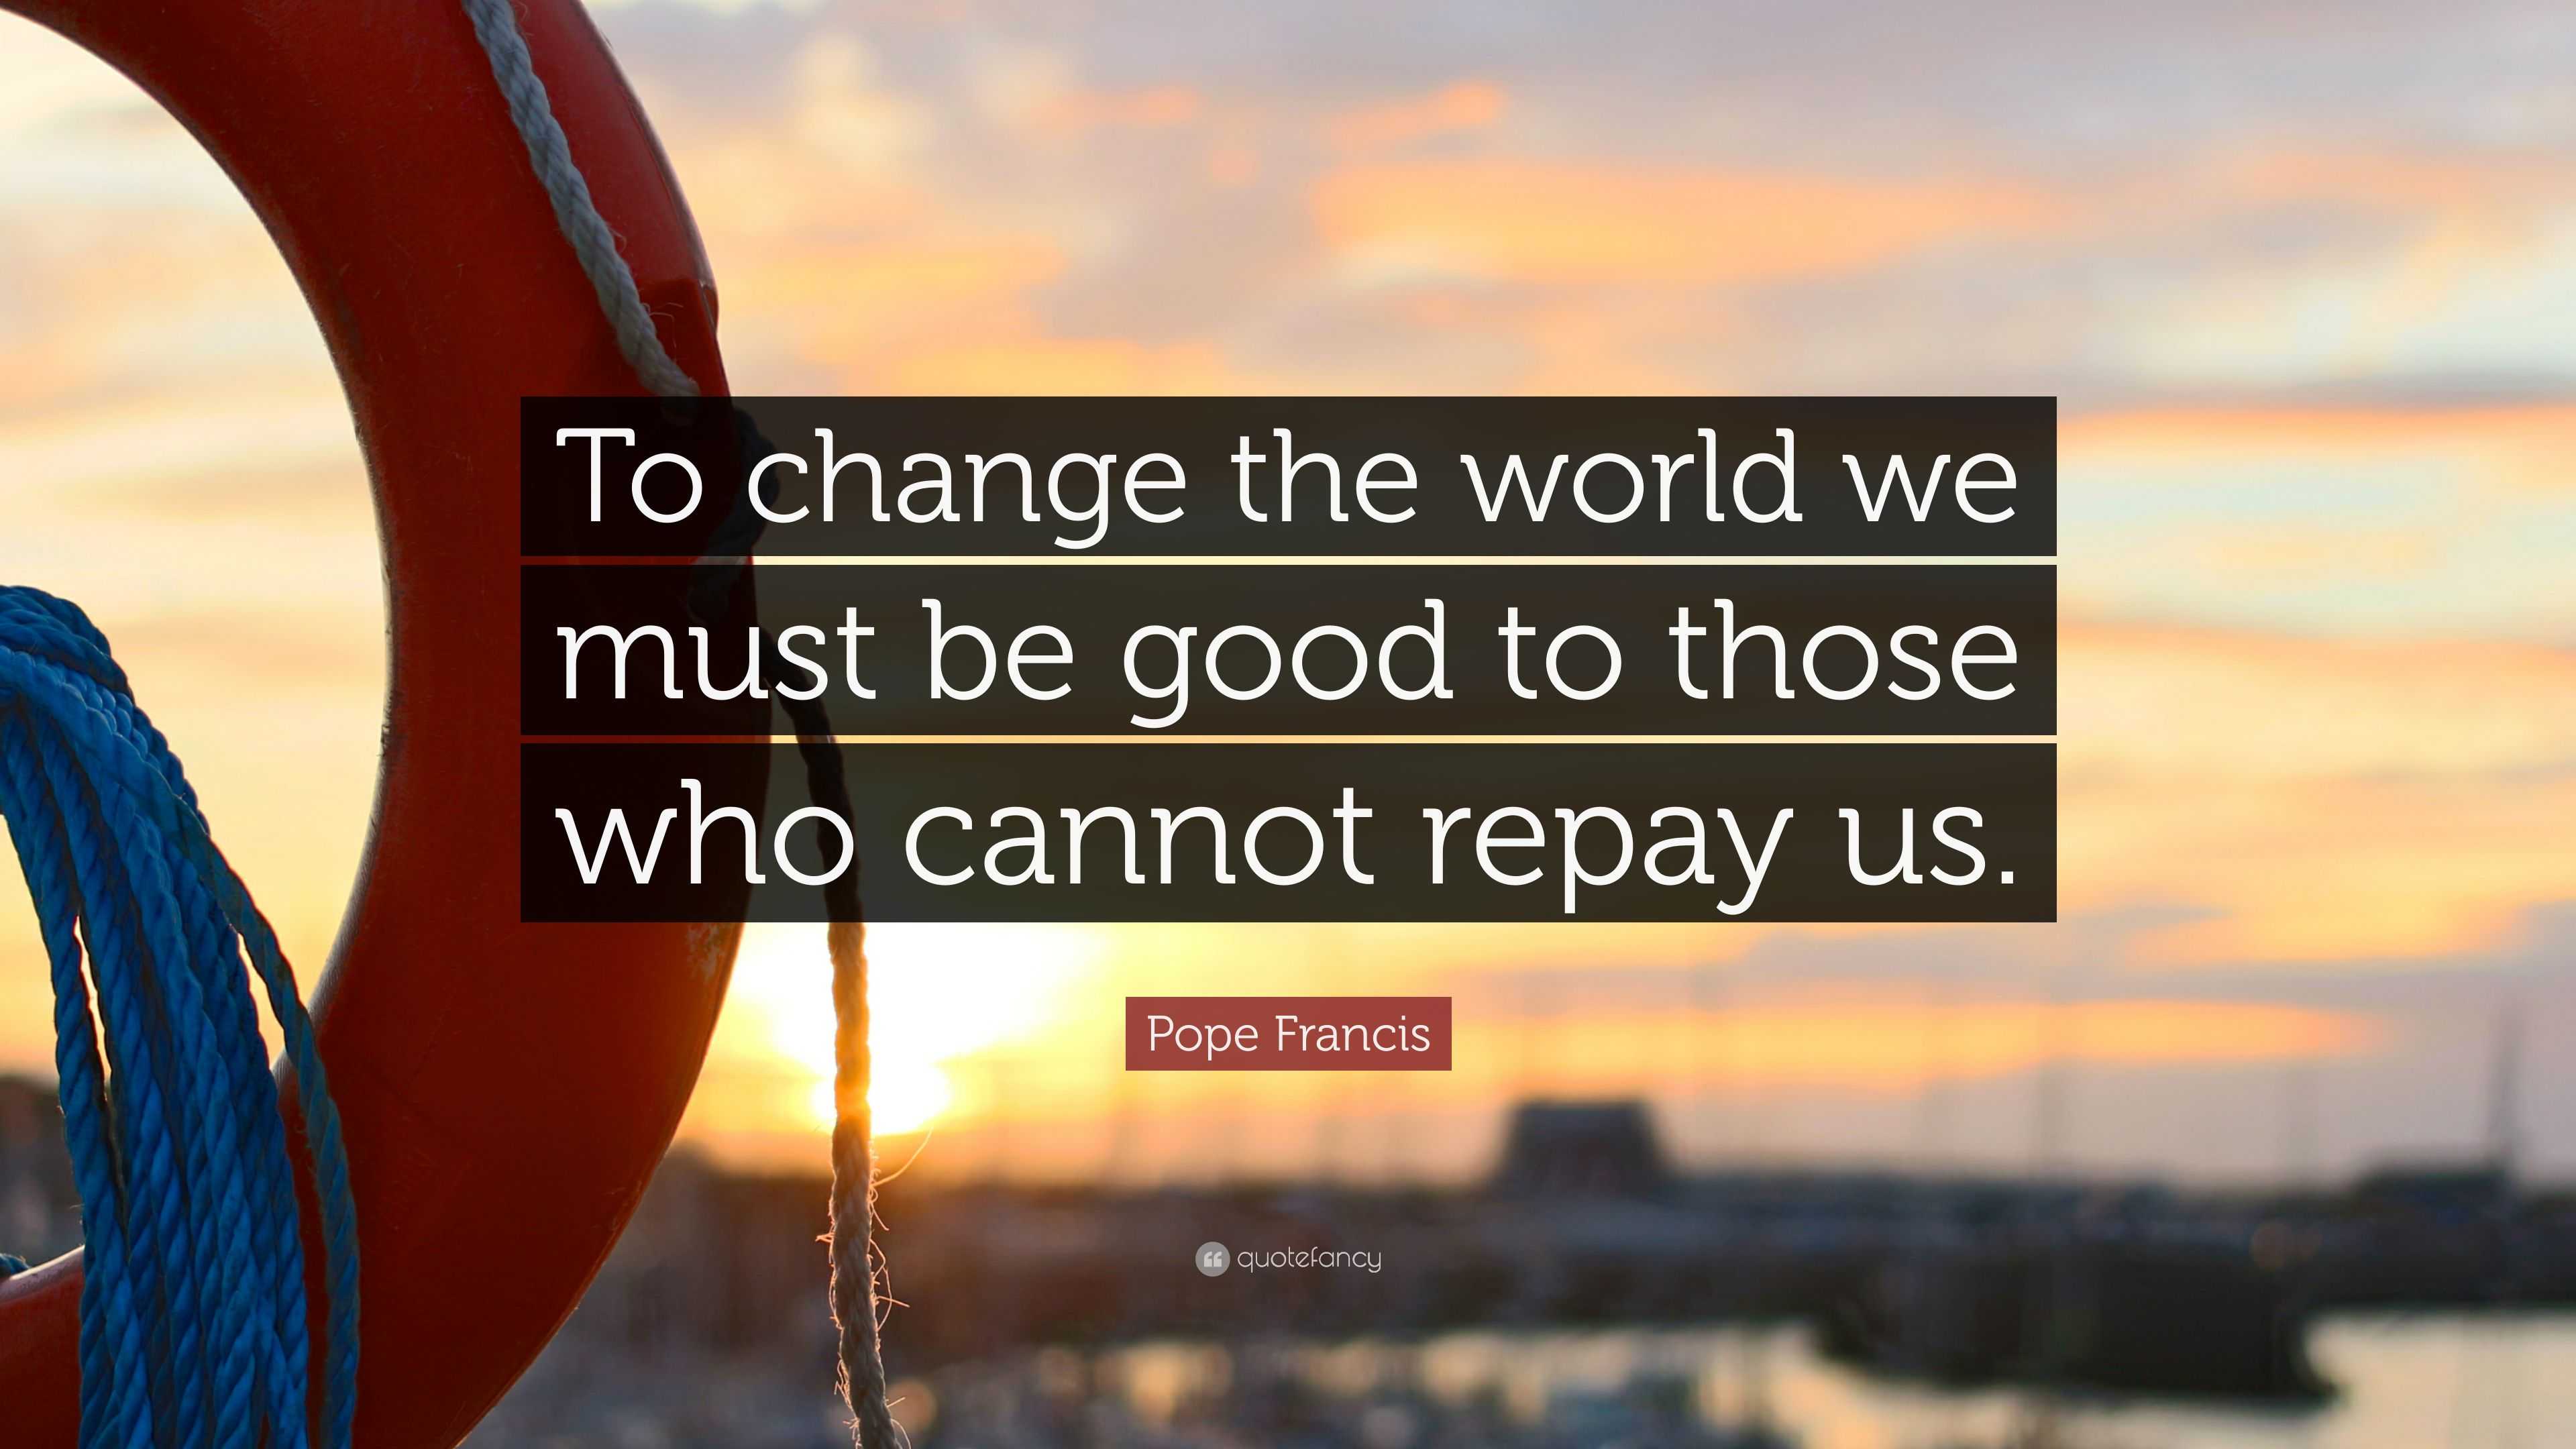 Pope Francis Quote: “To change the world we must be good to those who ...